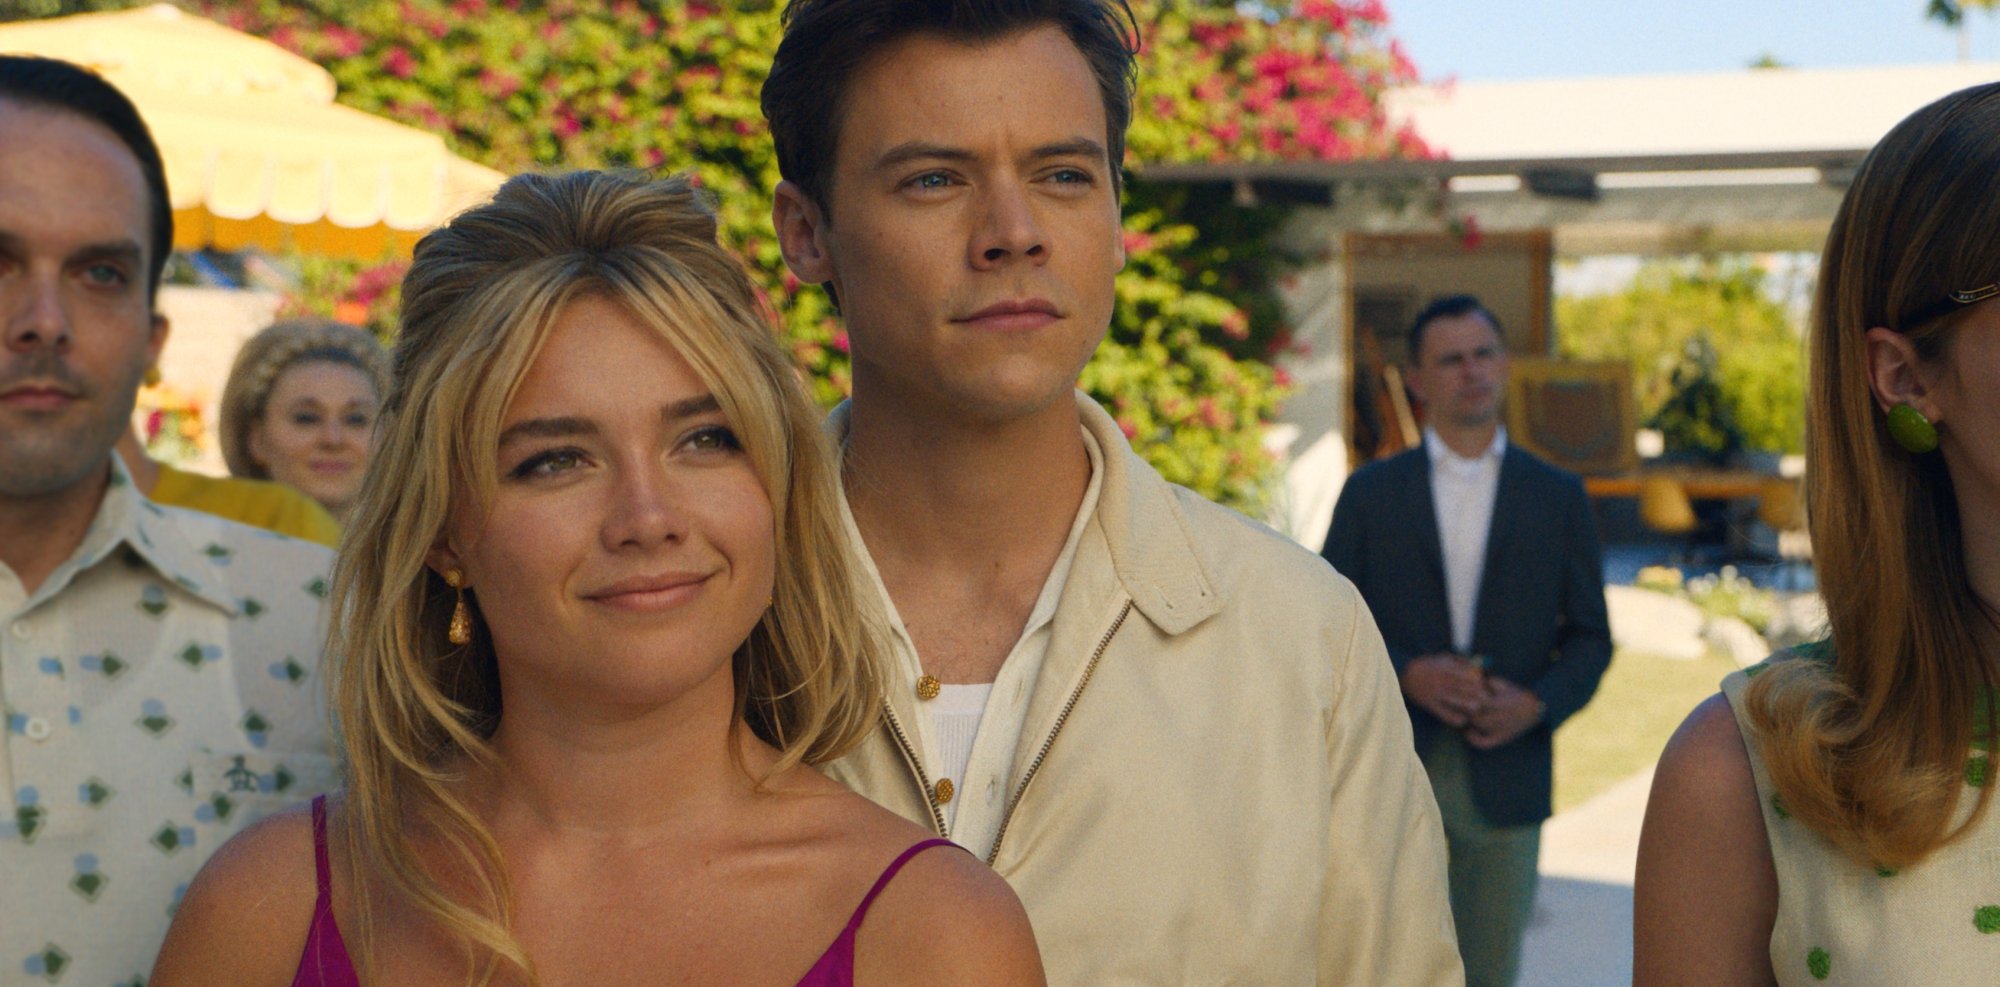 'Don't Worry Darling' Florence Pugh as Alice Chambers and Harry Styles as Jack Chambers. Pugh is smiling wearing gold earrings and a purple top. Styles is standing next to her slightly smiling wearing off-white colored clothes, surrounded by their friends.